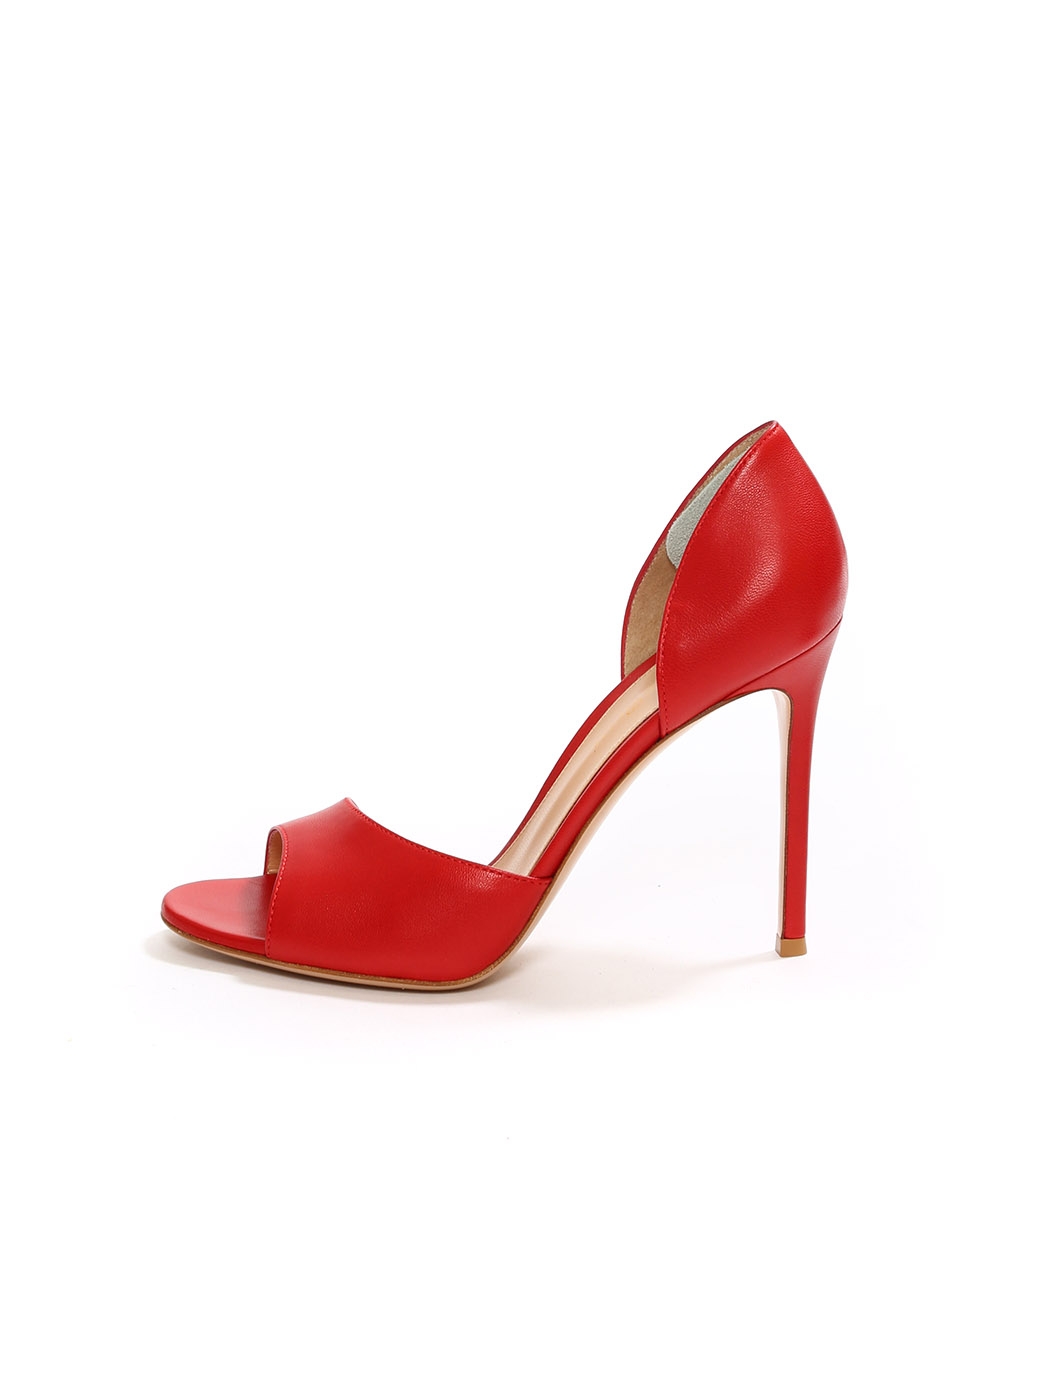 Louise Paris - GIANVITO ROSSI Cherry red leather high heel open toe ...